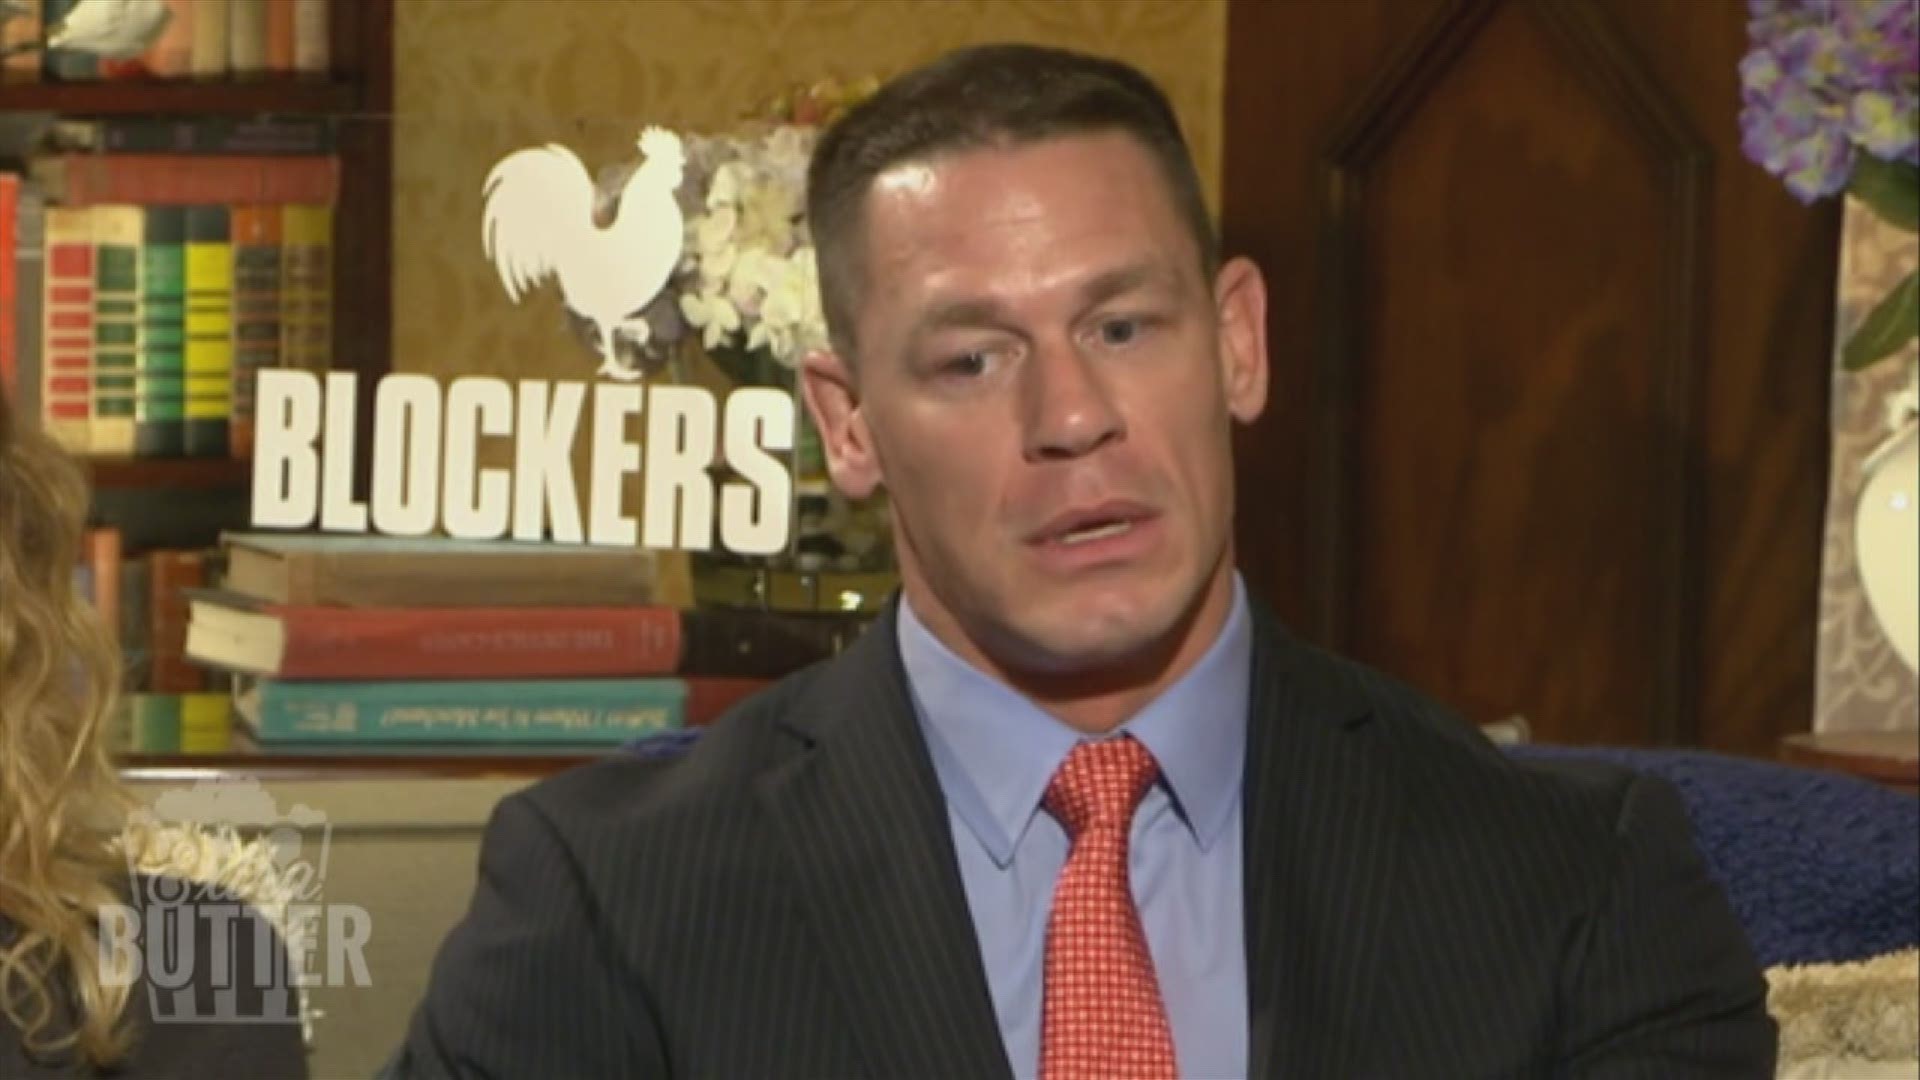 John Cena explains that the characters and story are what make "Blockers" work. (Travel and accommodations paid for by Universal Pictures). 